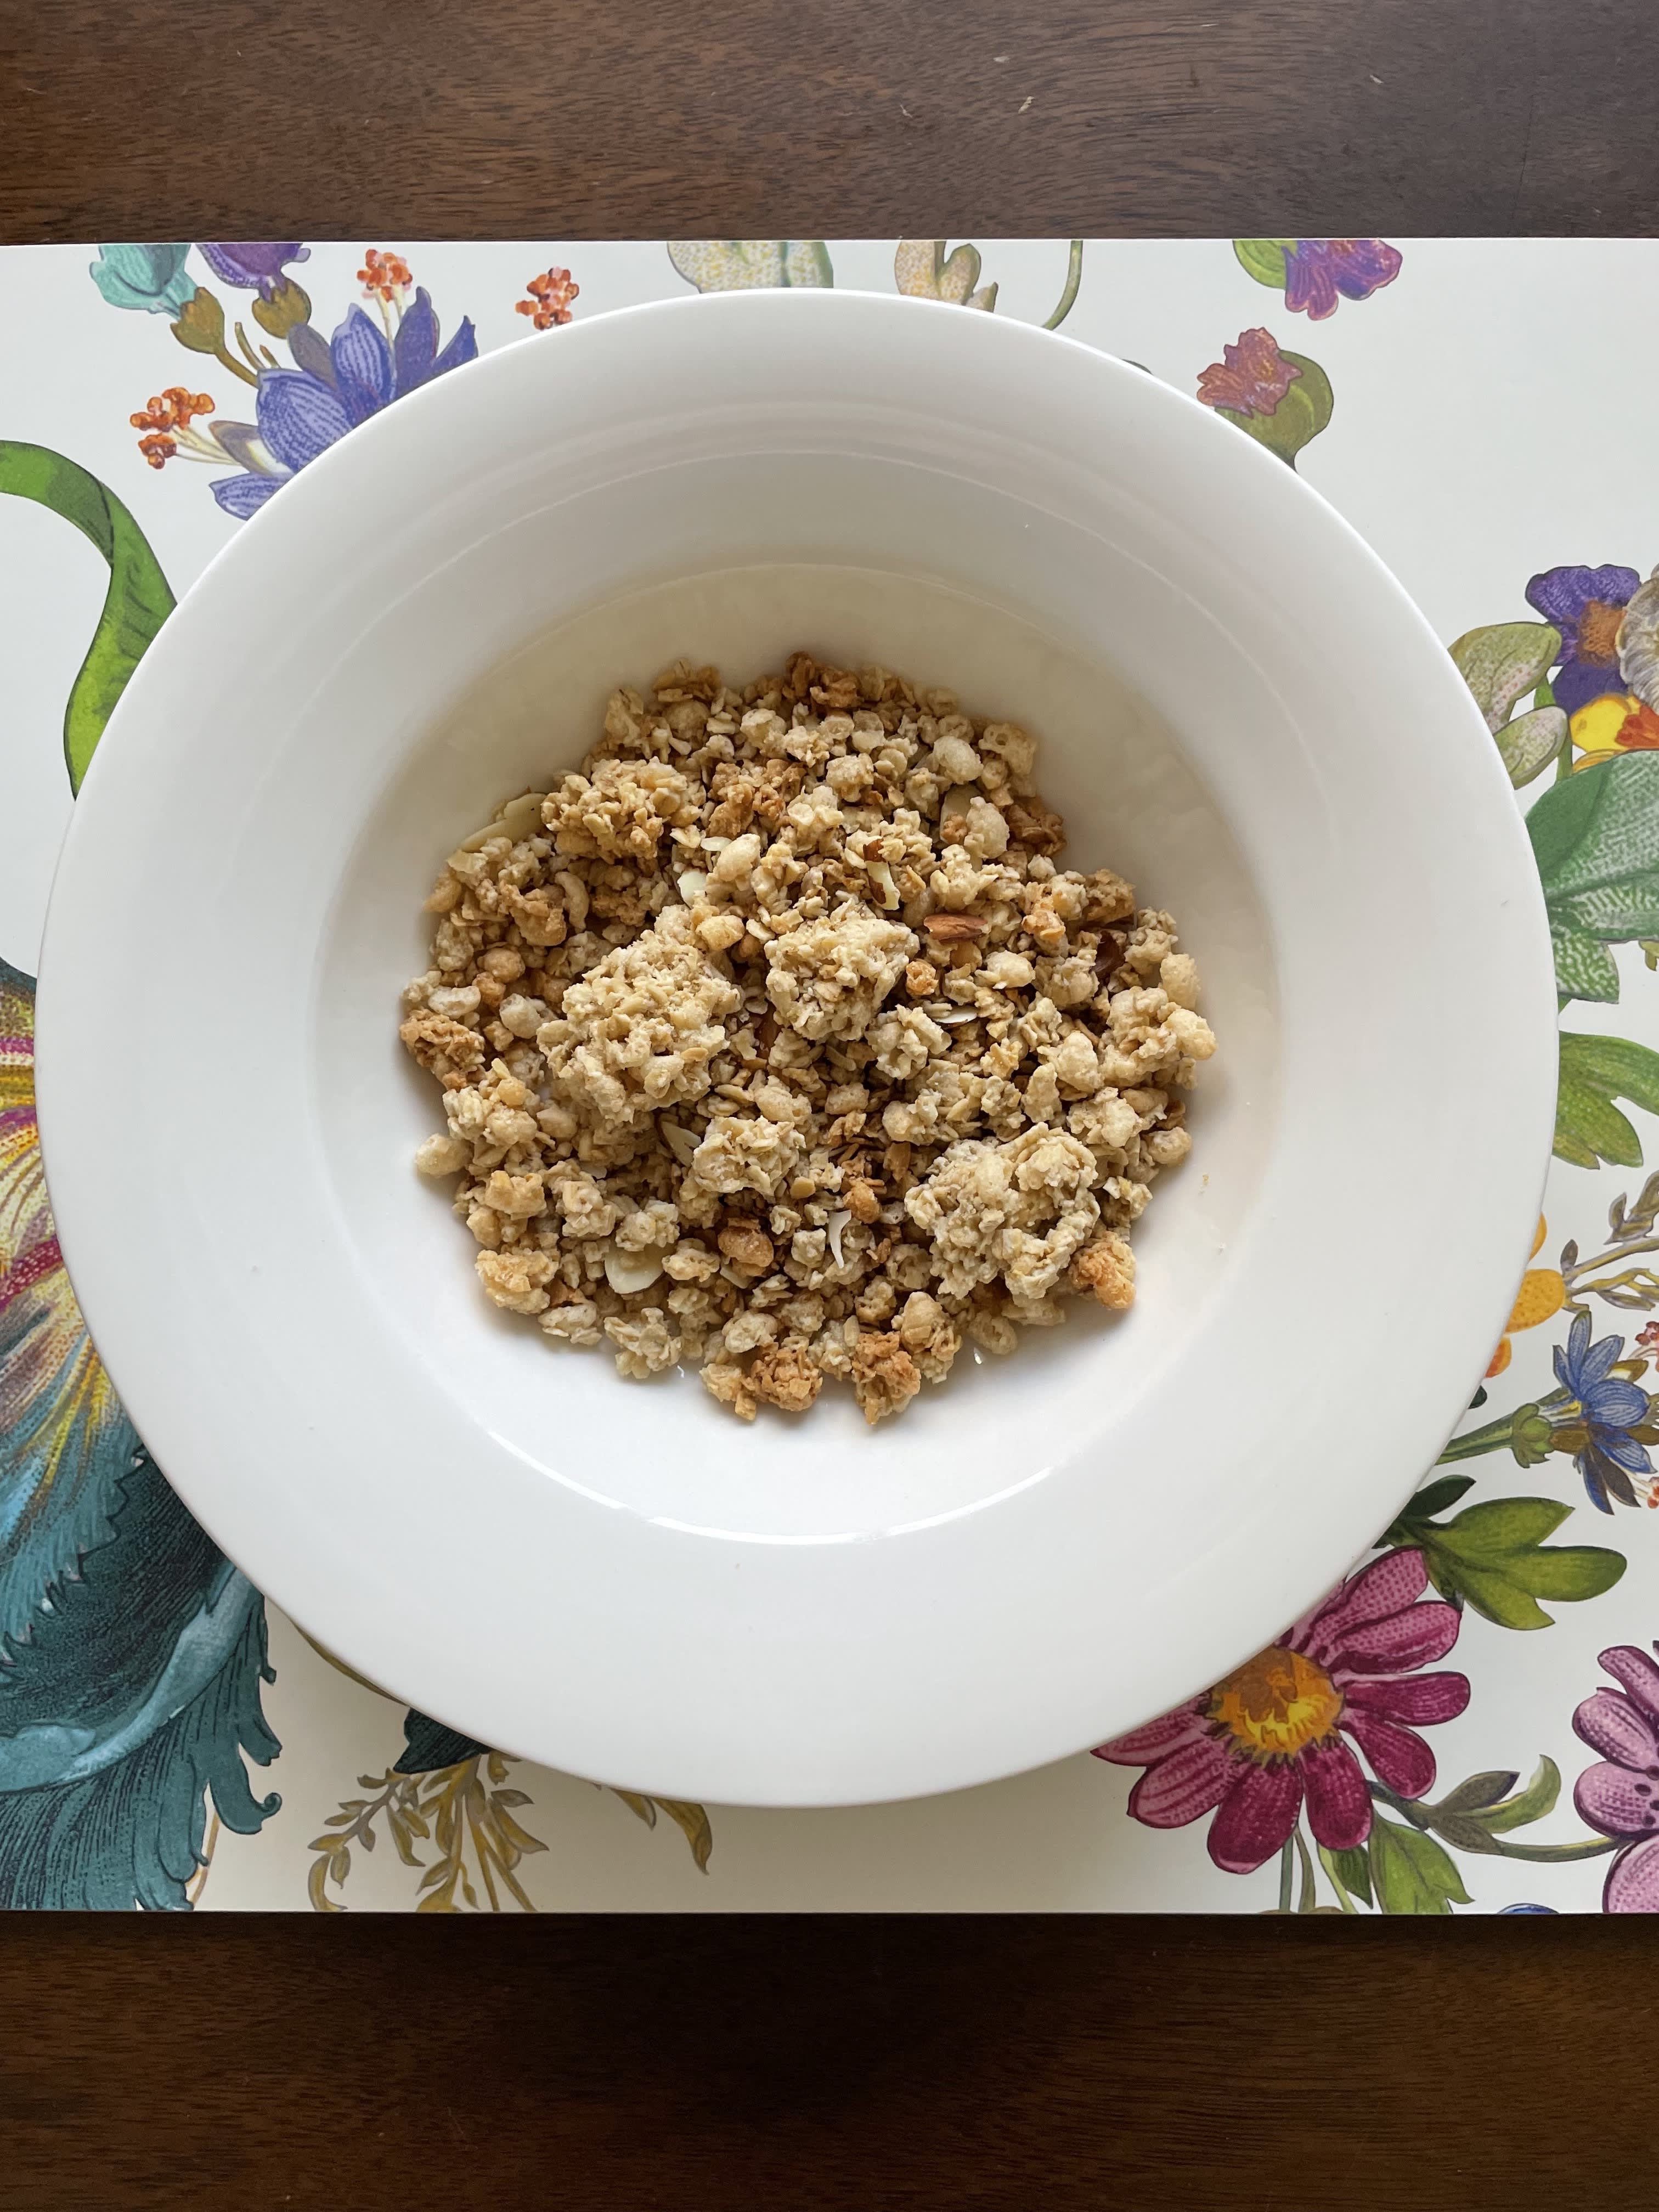 Trader Joe's Just the Clusters Vanilla Almond Granola Cereal Review